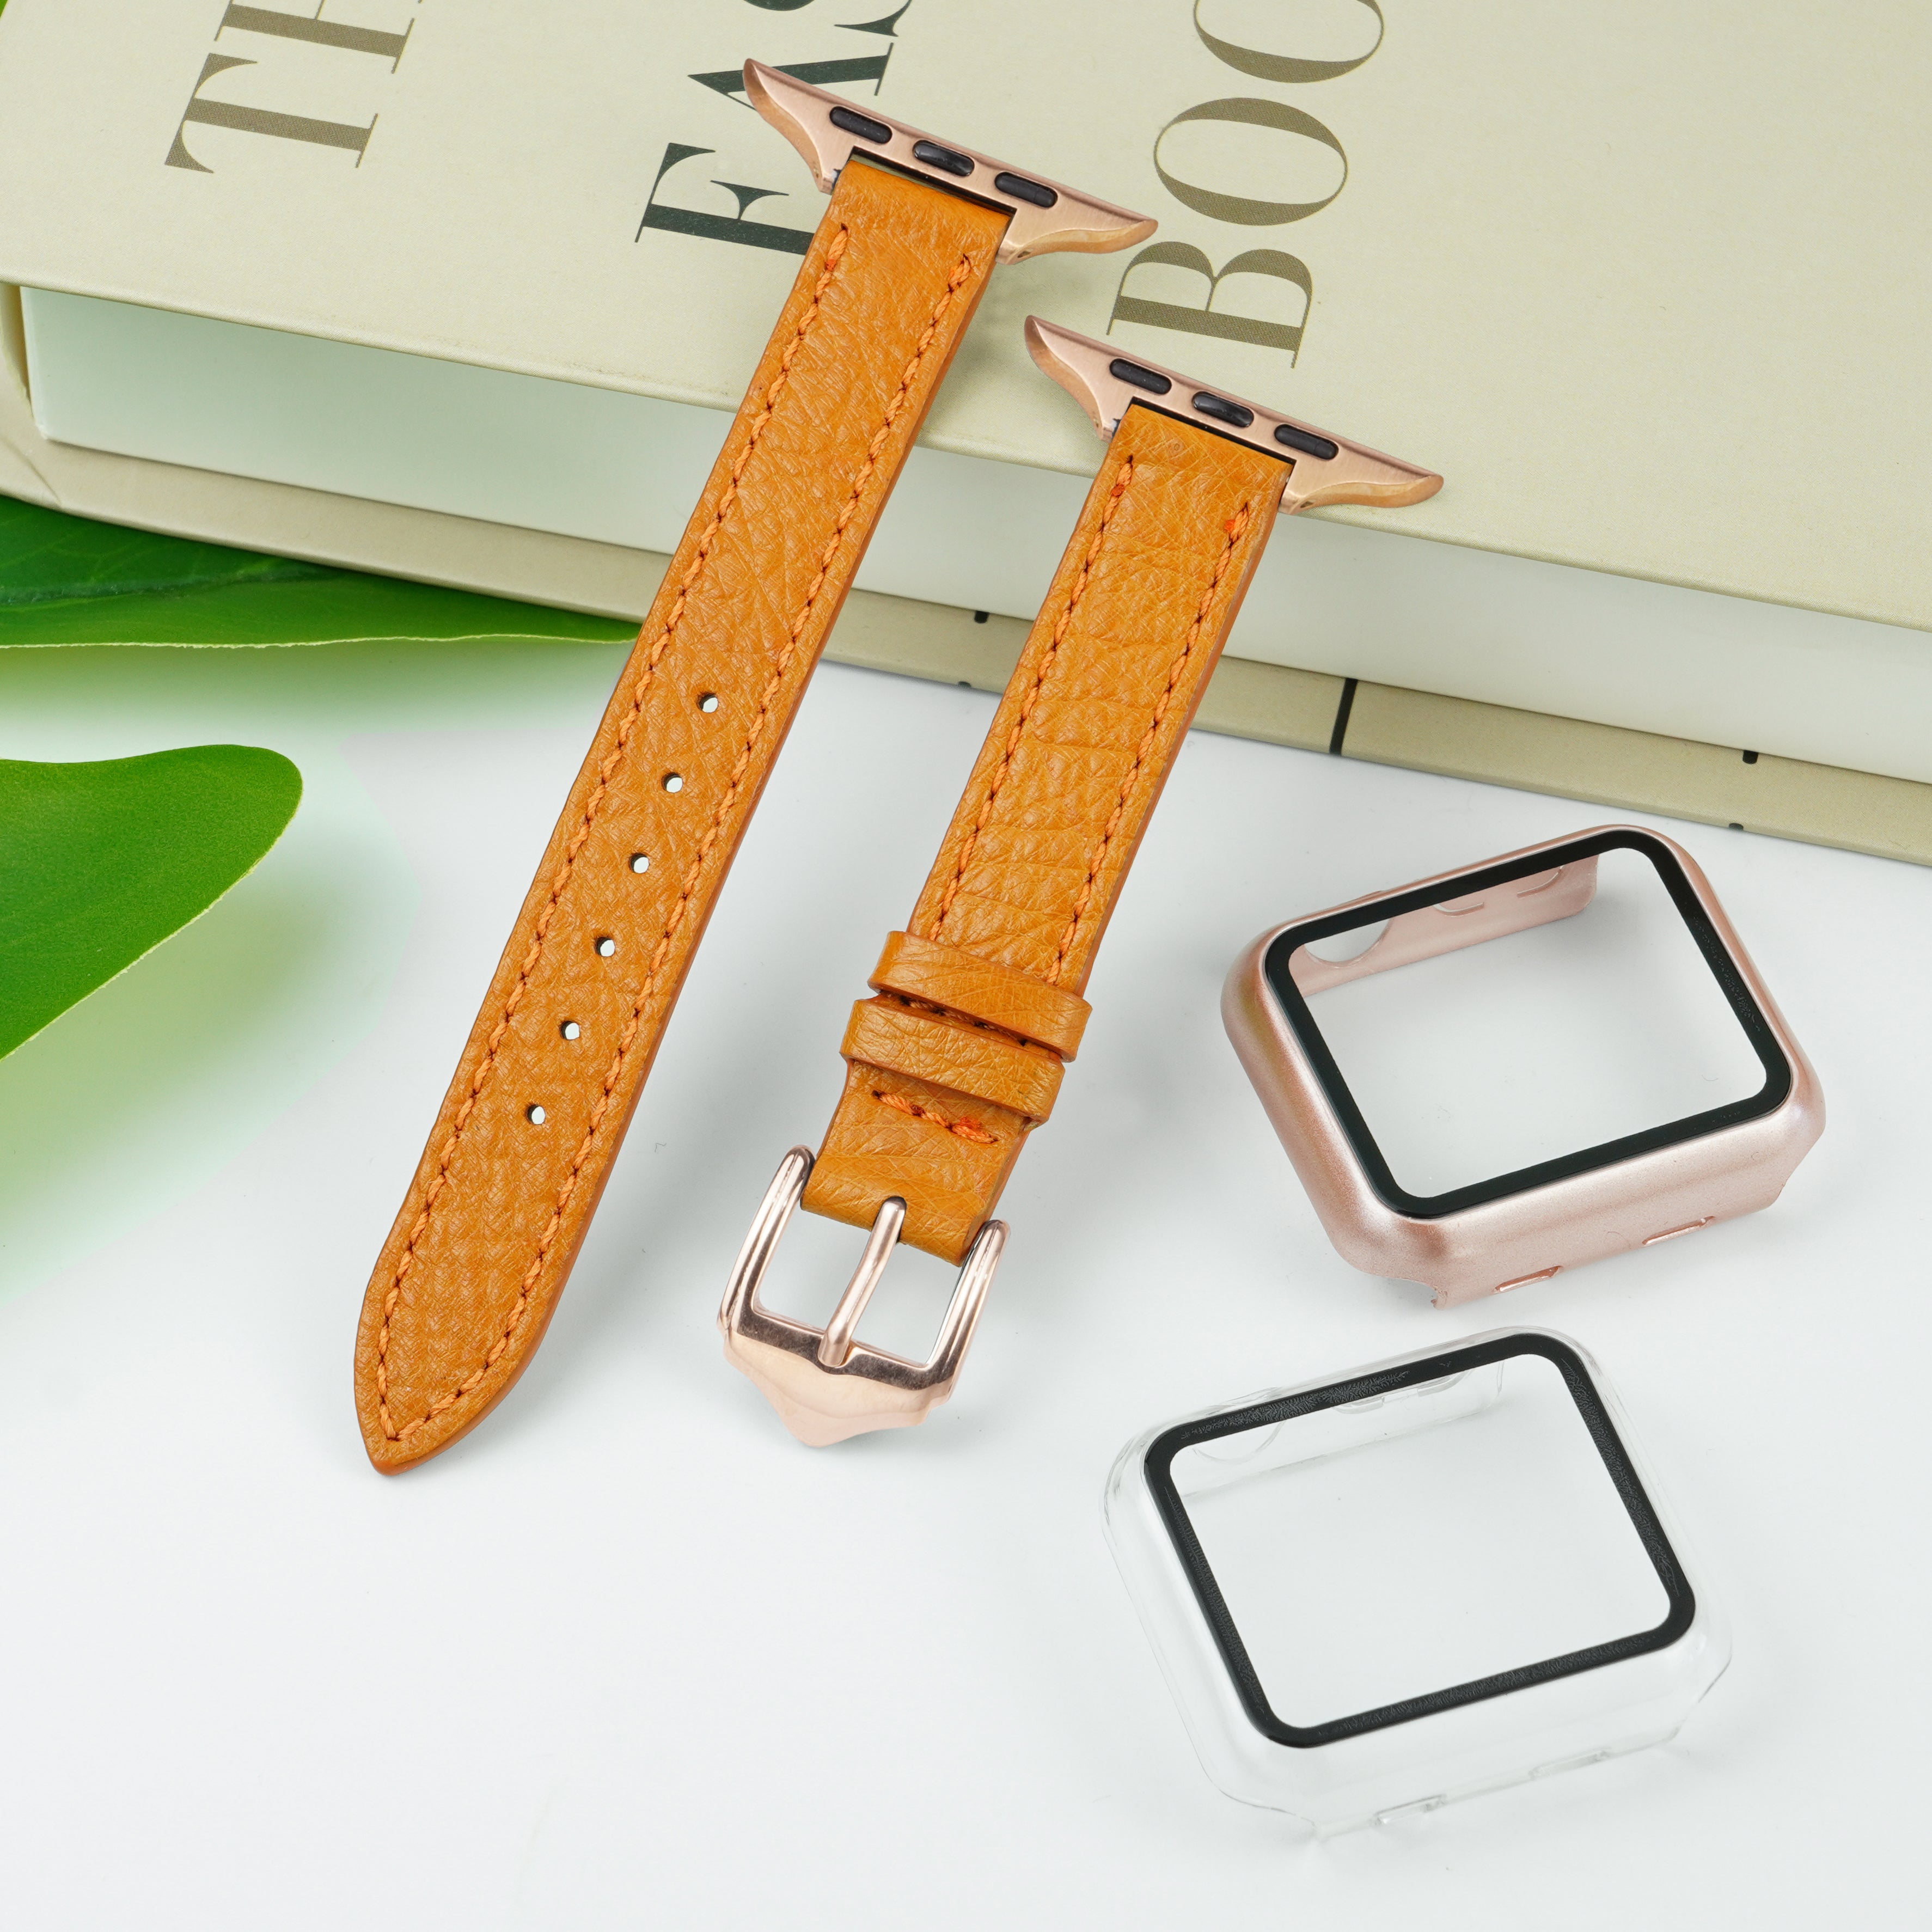 Tan Flat Ostrich Leather Band Compatible Apple Watch Iwatch 42mm Screen Protector Case Gold Adapter Replacement Strap For Smartwatch Series 1 2 3 Leather Handmade AW-182G-W-42MM